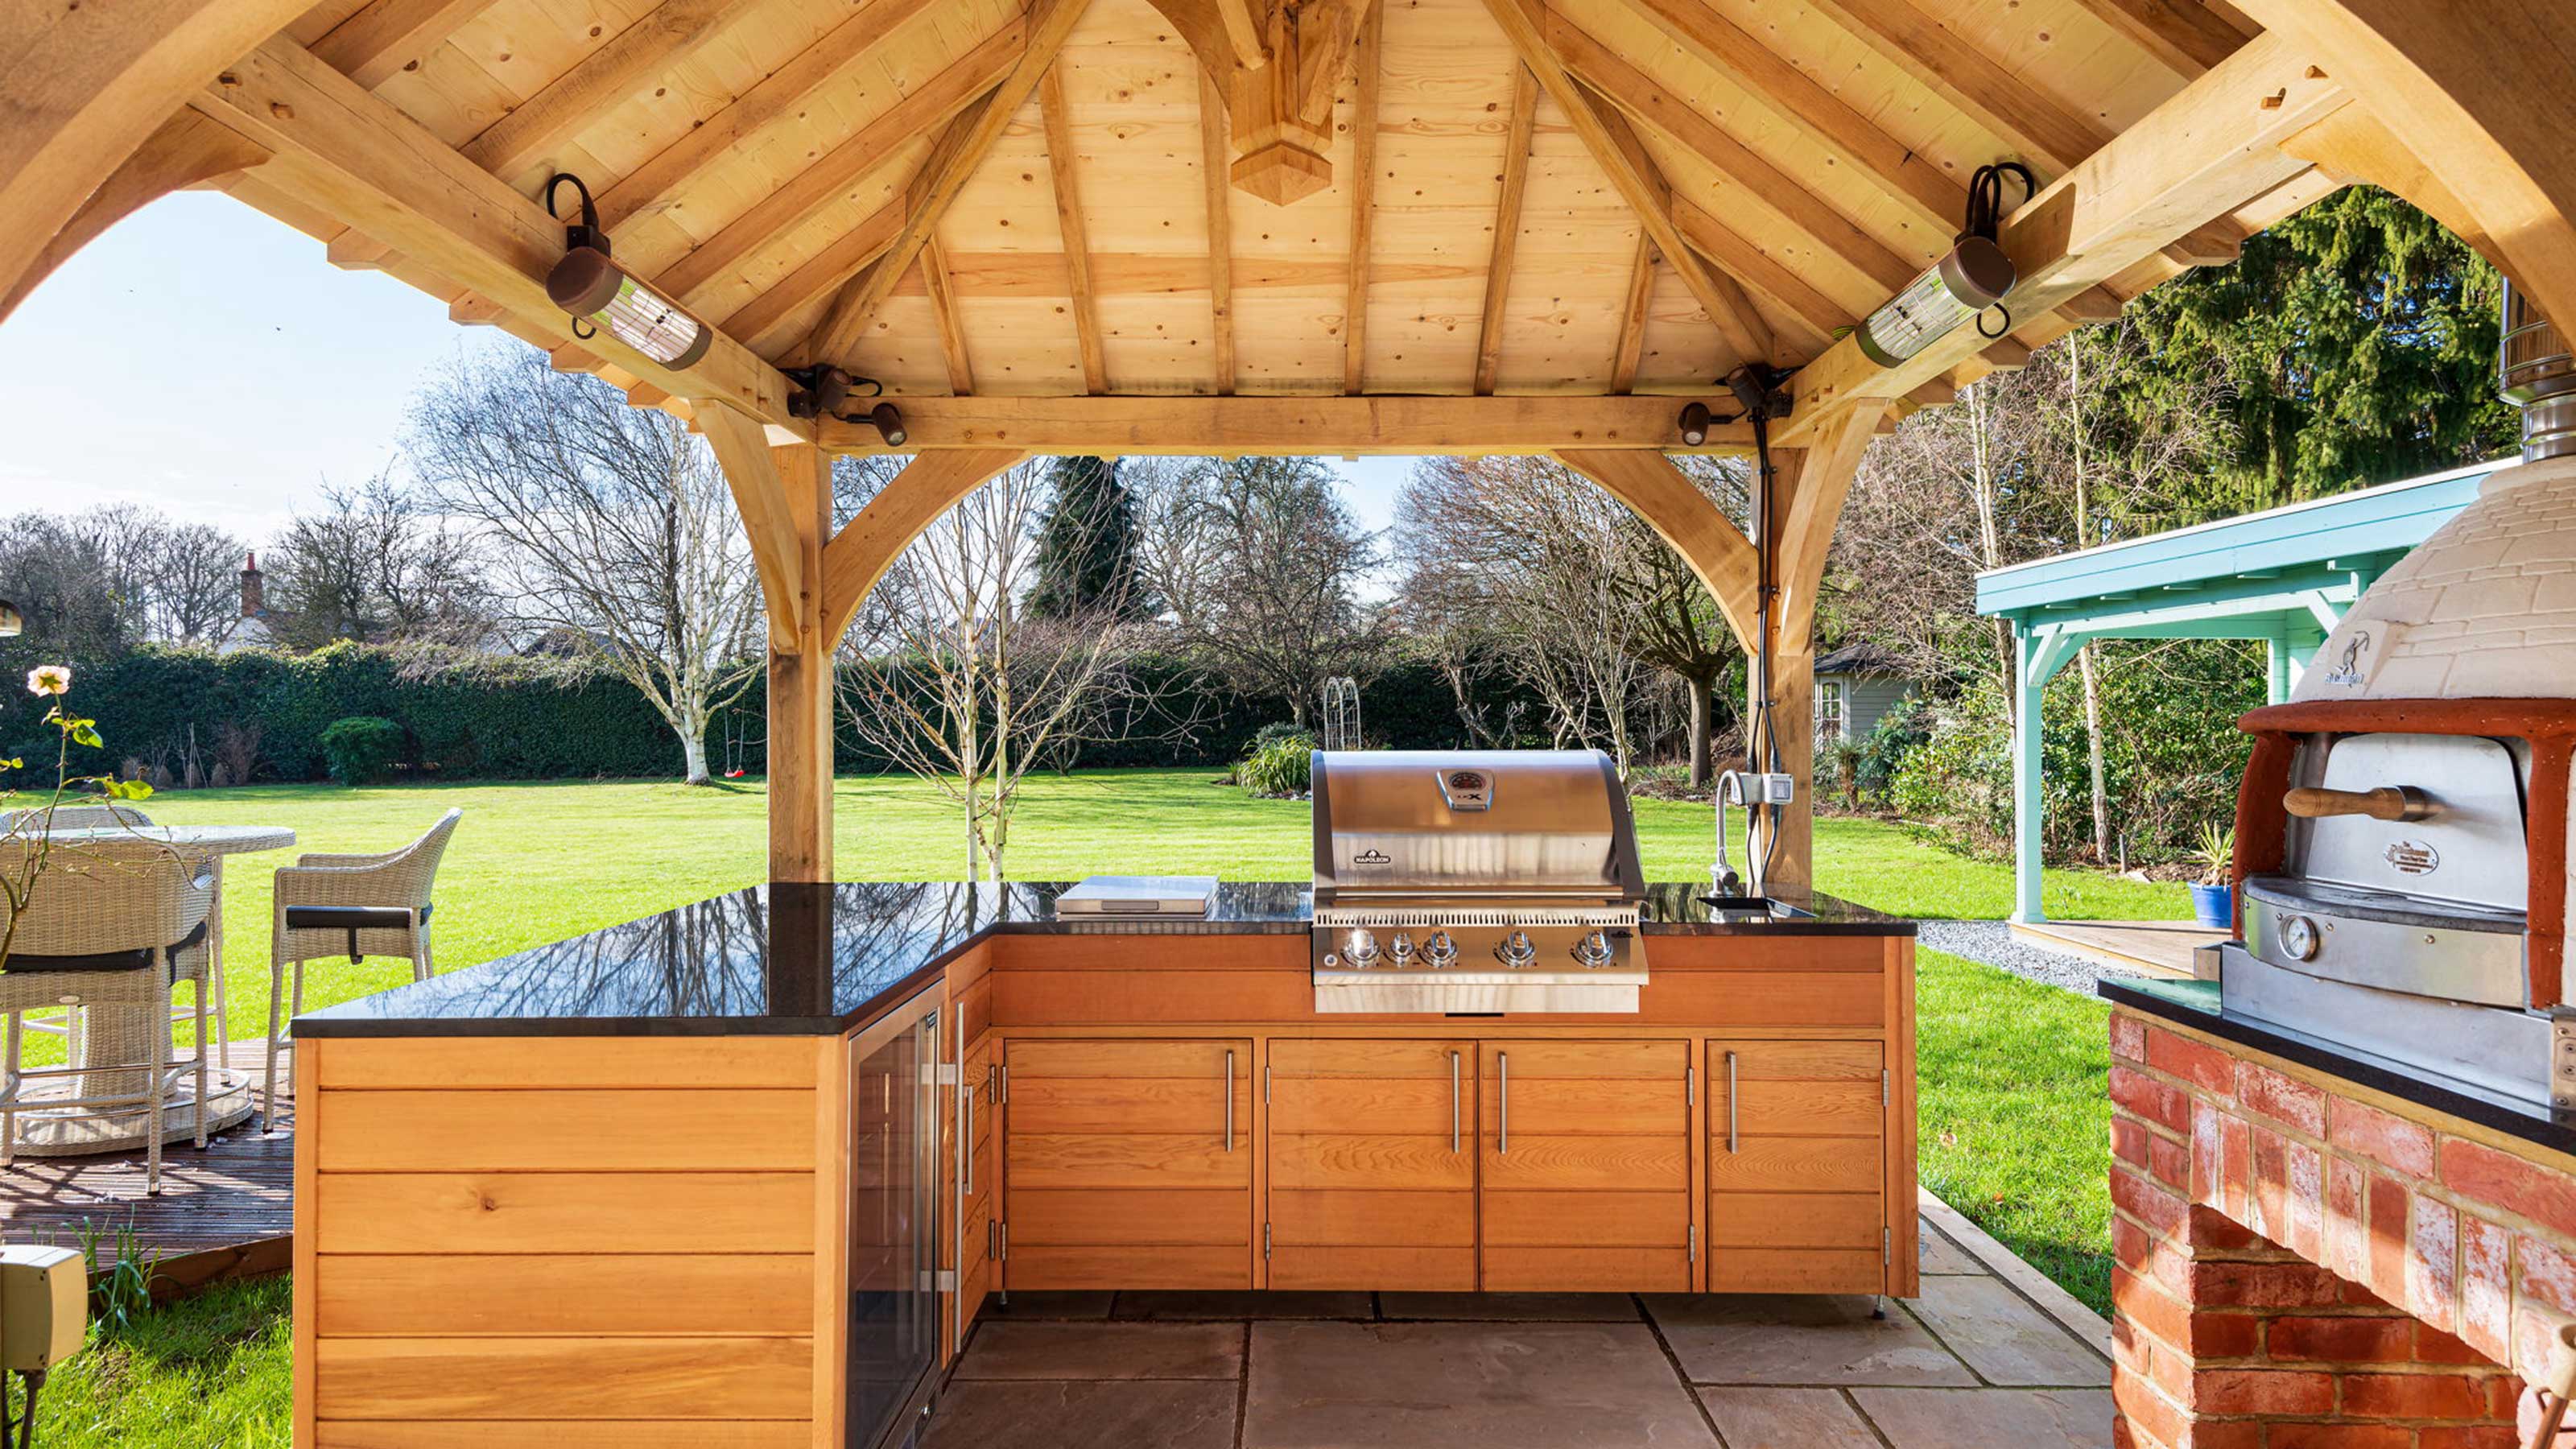 BBQ shelter ideas 20 covered cooking spaces   GardeningEtc